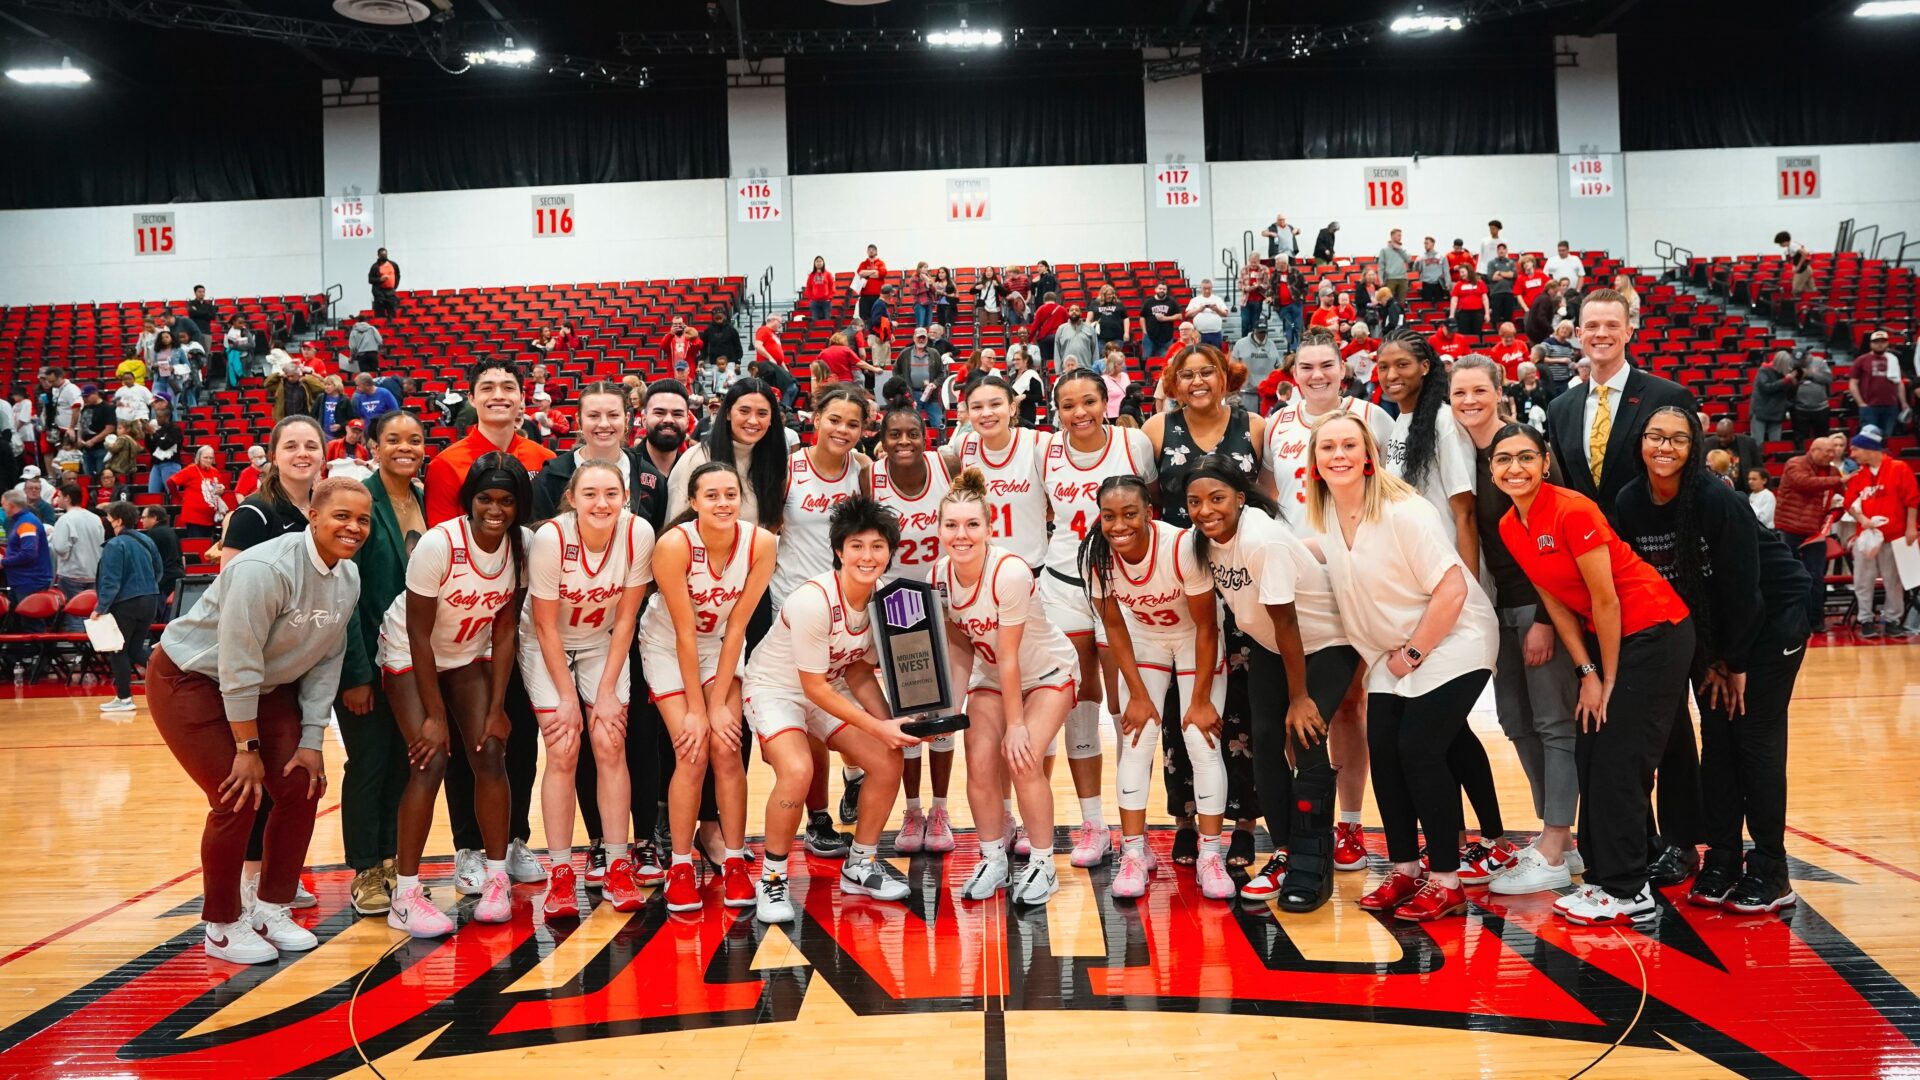 The UNLV Lady Rebels Women's Basketball team proudly gathered on the court, smiling and posing with a championship trophy, exemplifying the team spirit and success that can be achieved through effective use of video analysis and strategic development.